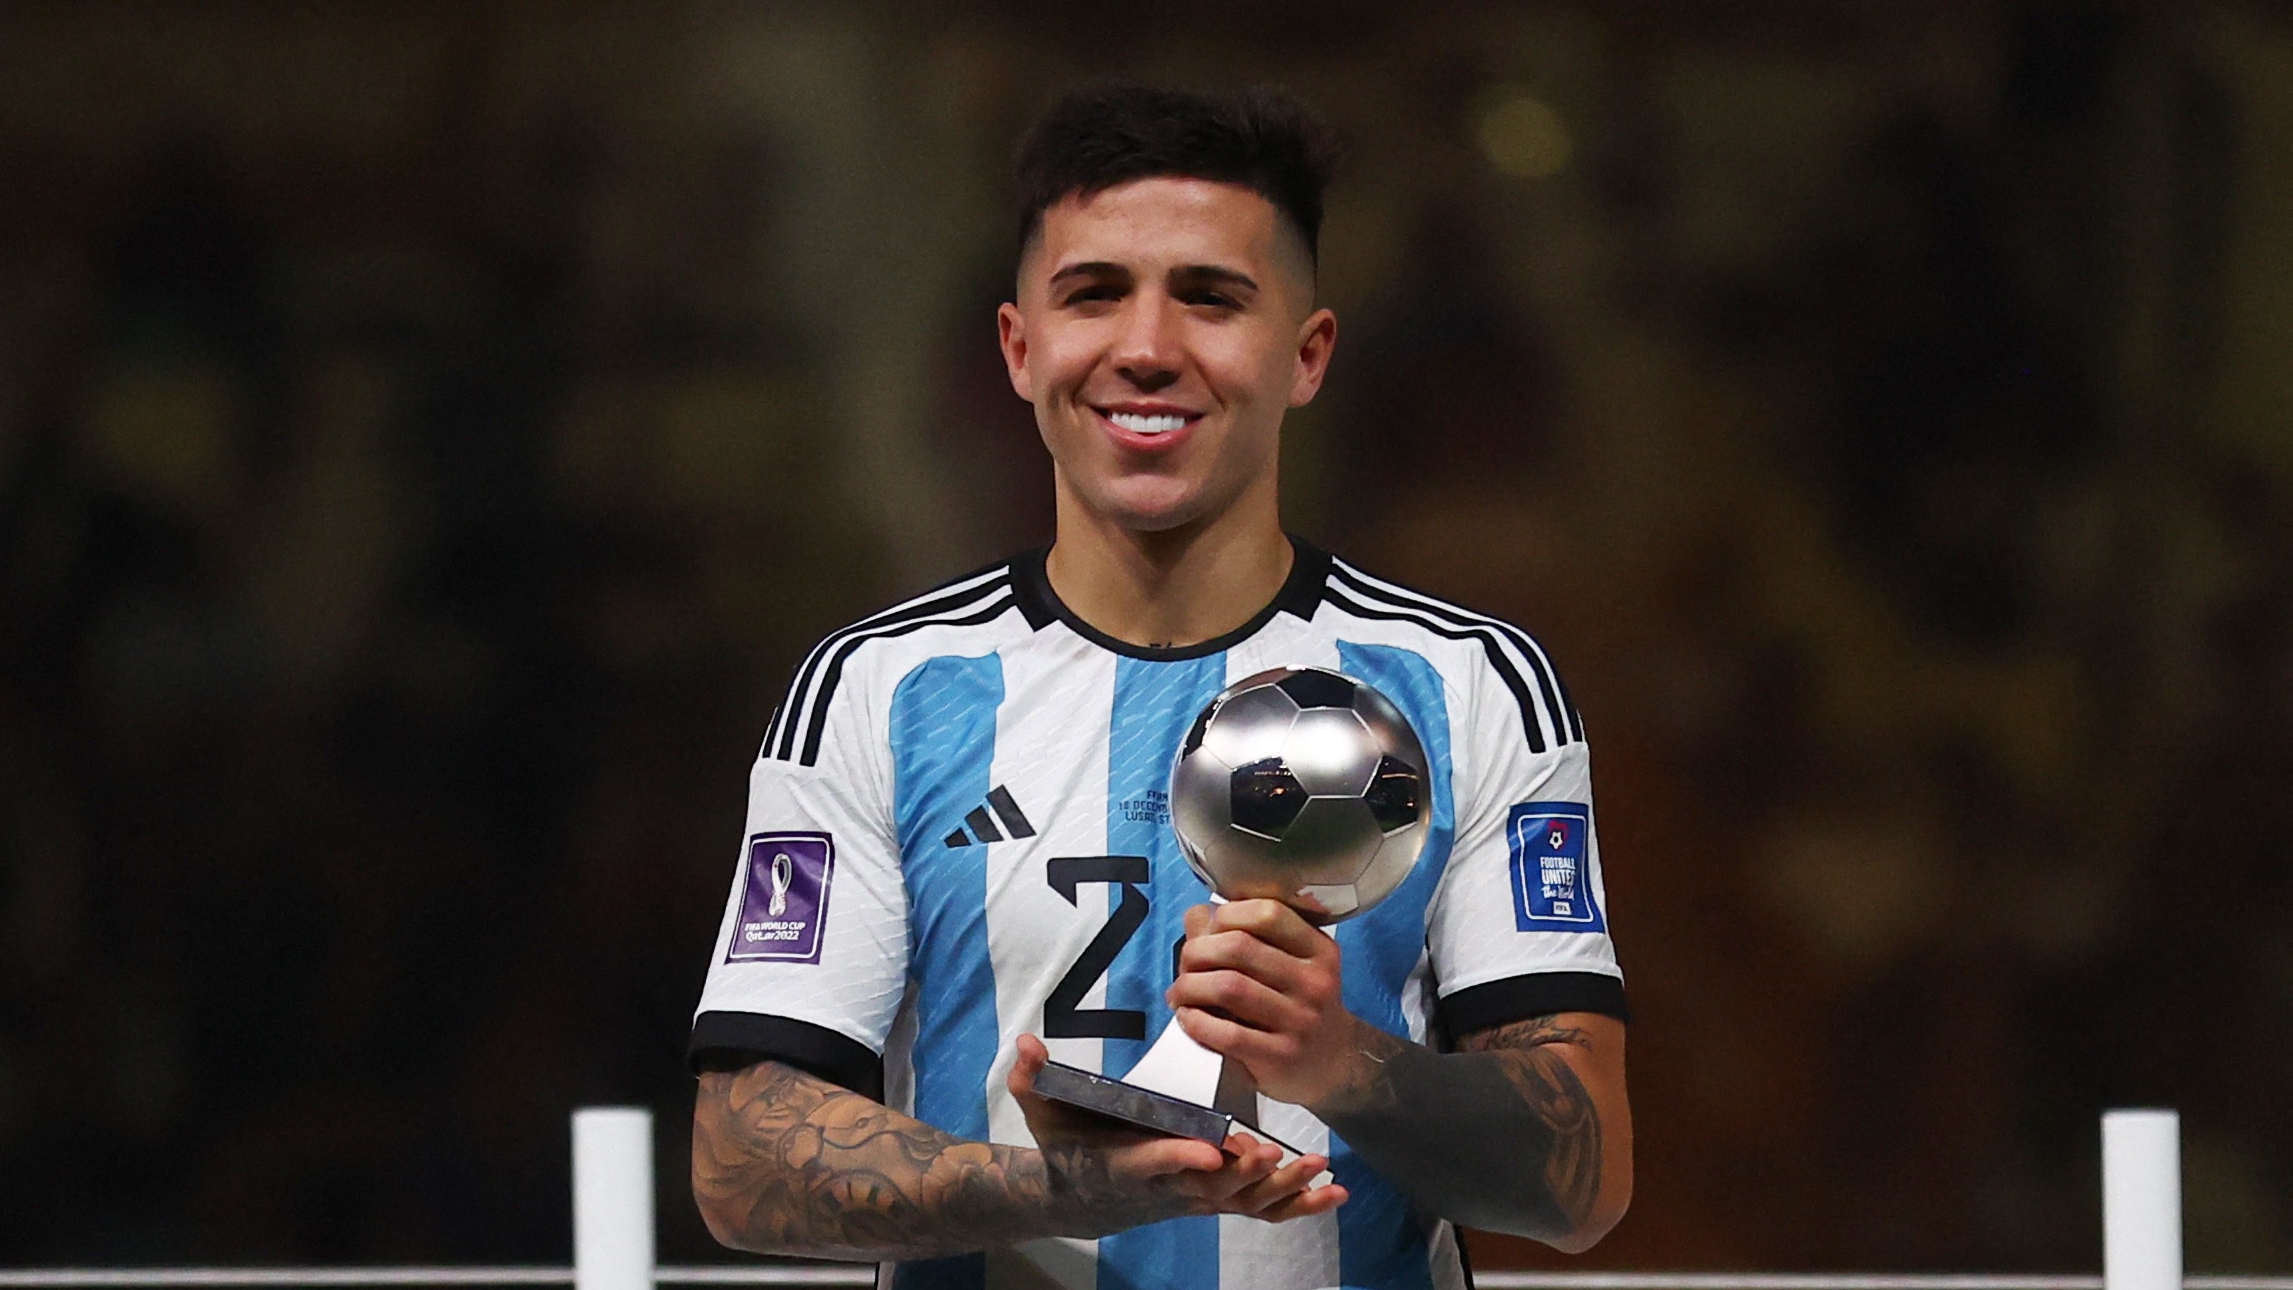 Soccer Football - FIFA World Cup Qatar 2022 - Final - Argentina v France - Lusail Stadium, Lusail, Qatar - December 18, 2022 Argentina's Enzo Fernandez poses with the Best Young Player award trophy REUTERS/Carl Recine